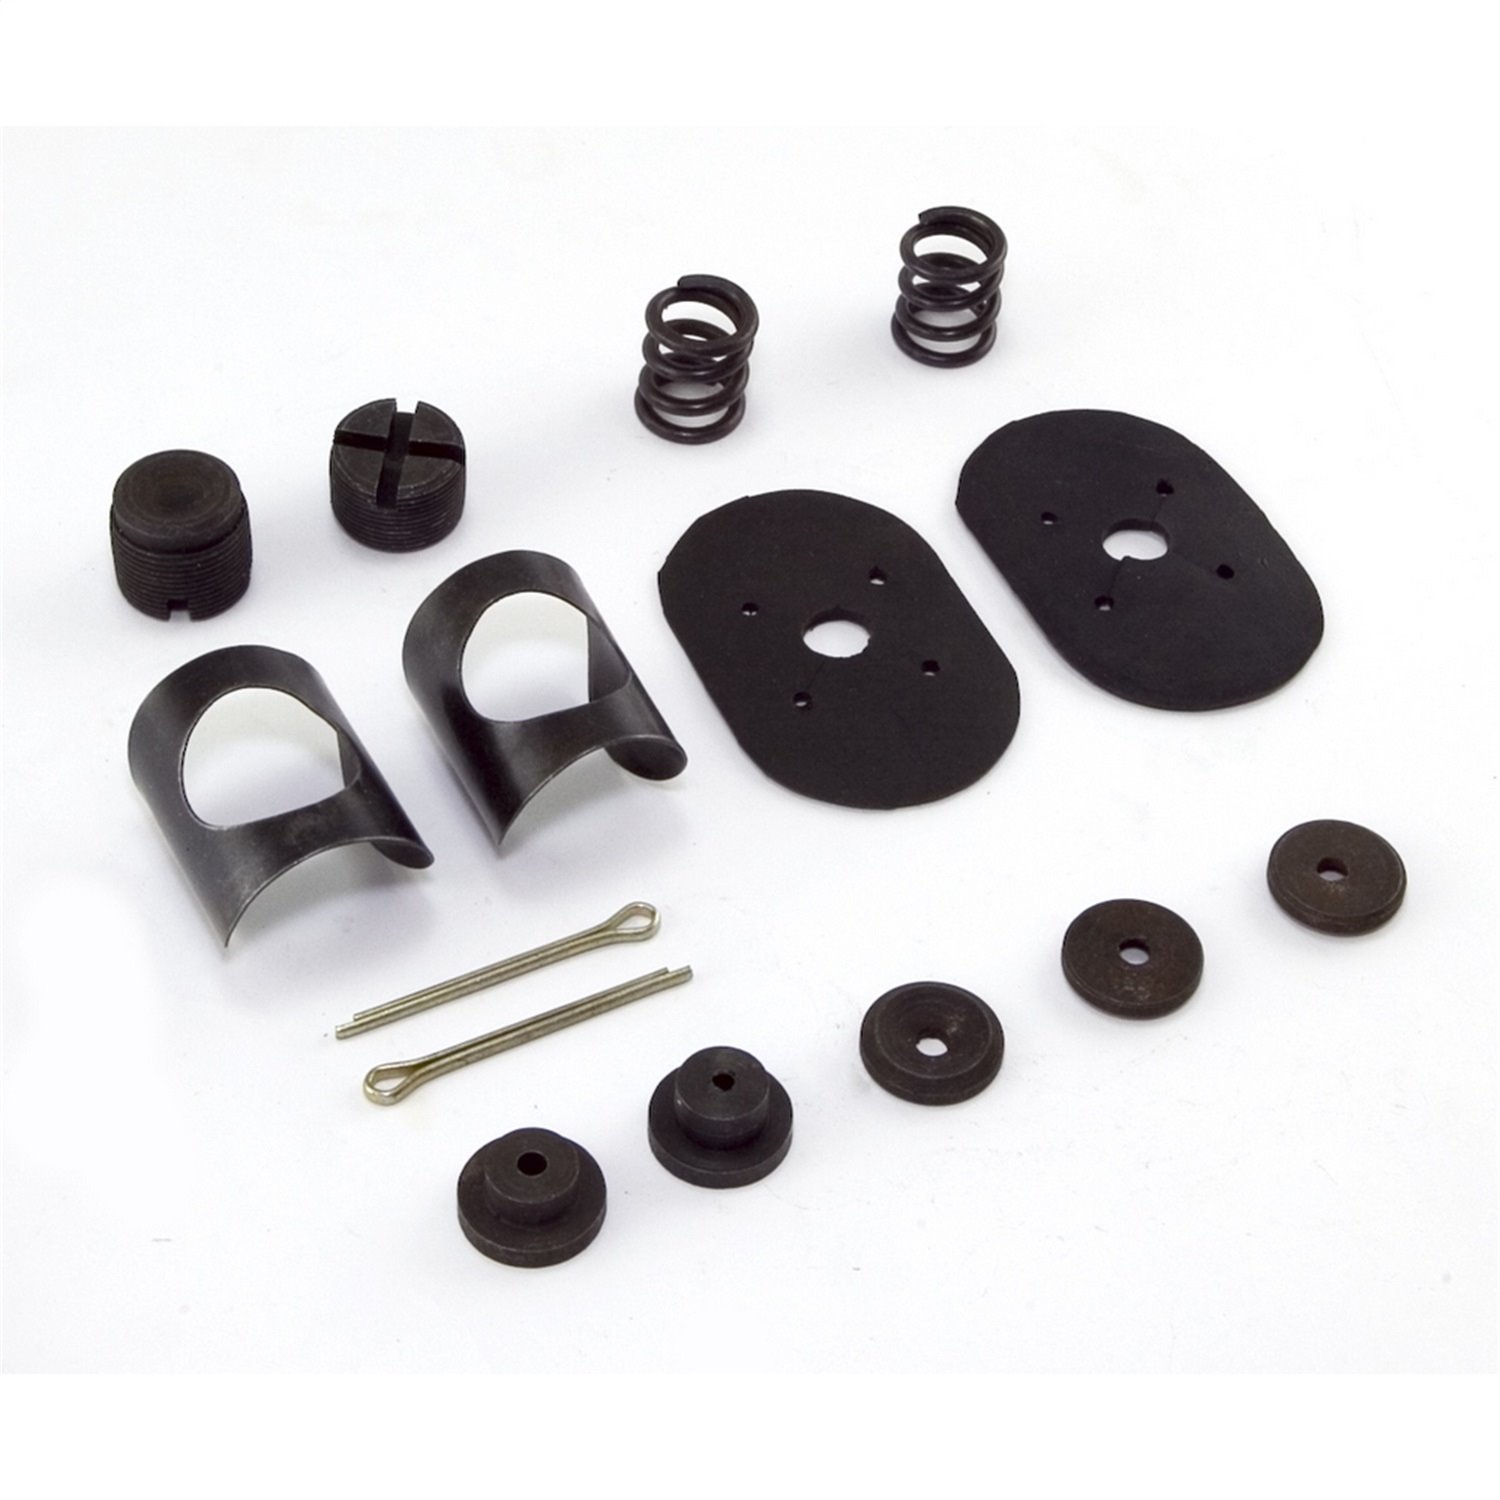 This drag link repair kit includes caps cups springs and washers. Fits 41-71 Willys and Jeep models.